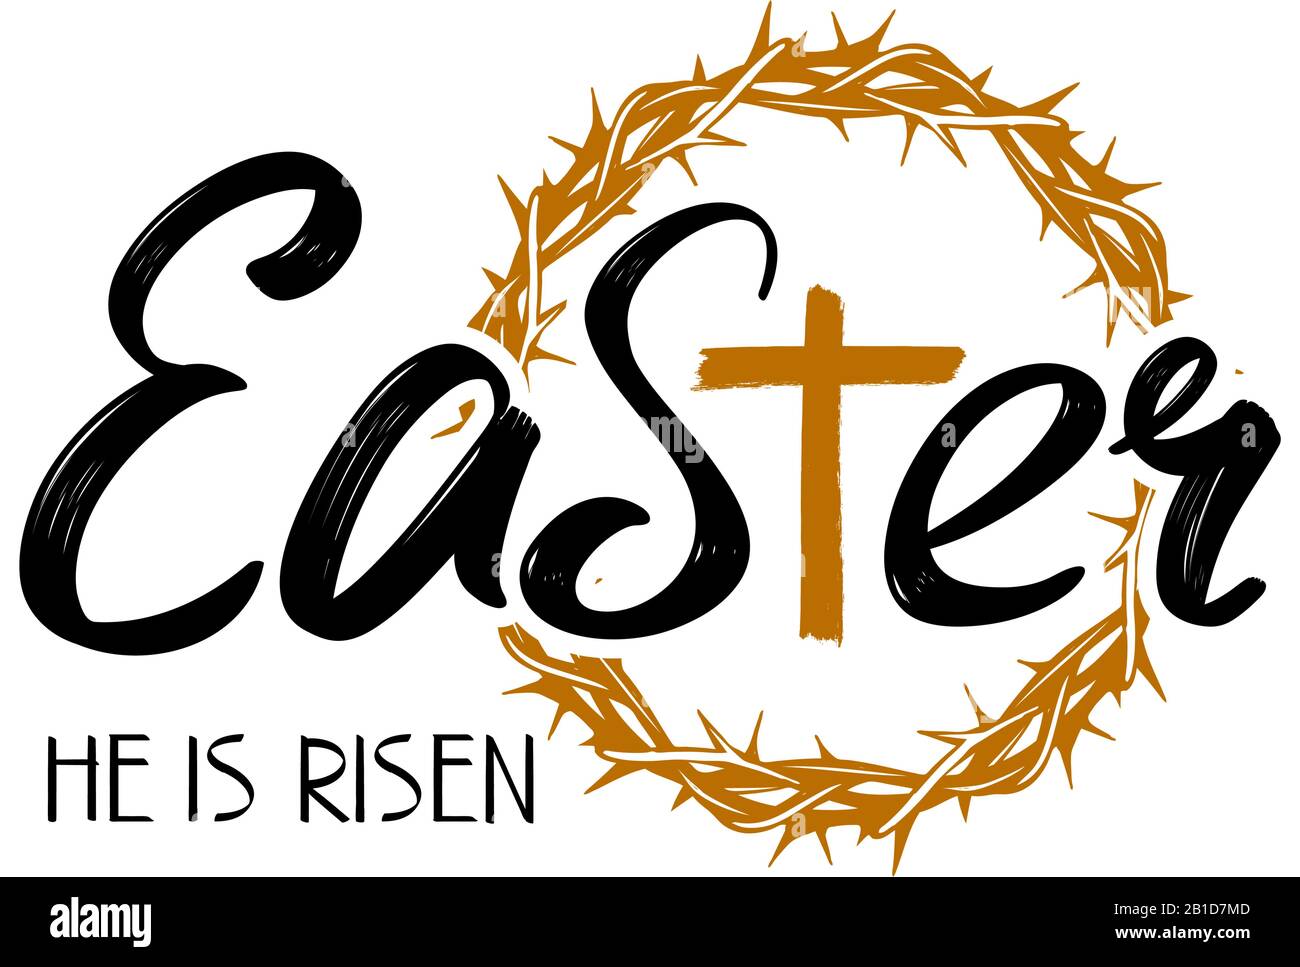 crown of thorns and calligraphic text logo, easter religious ...